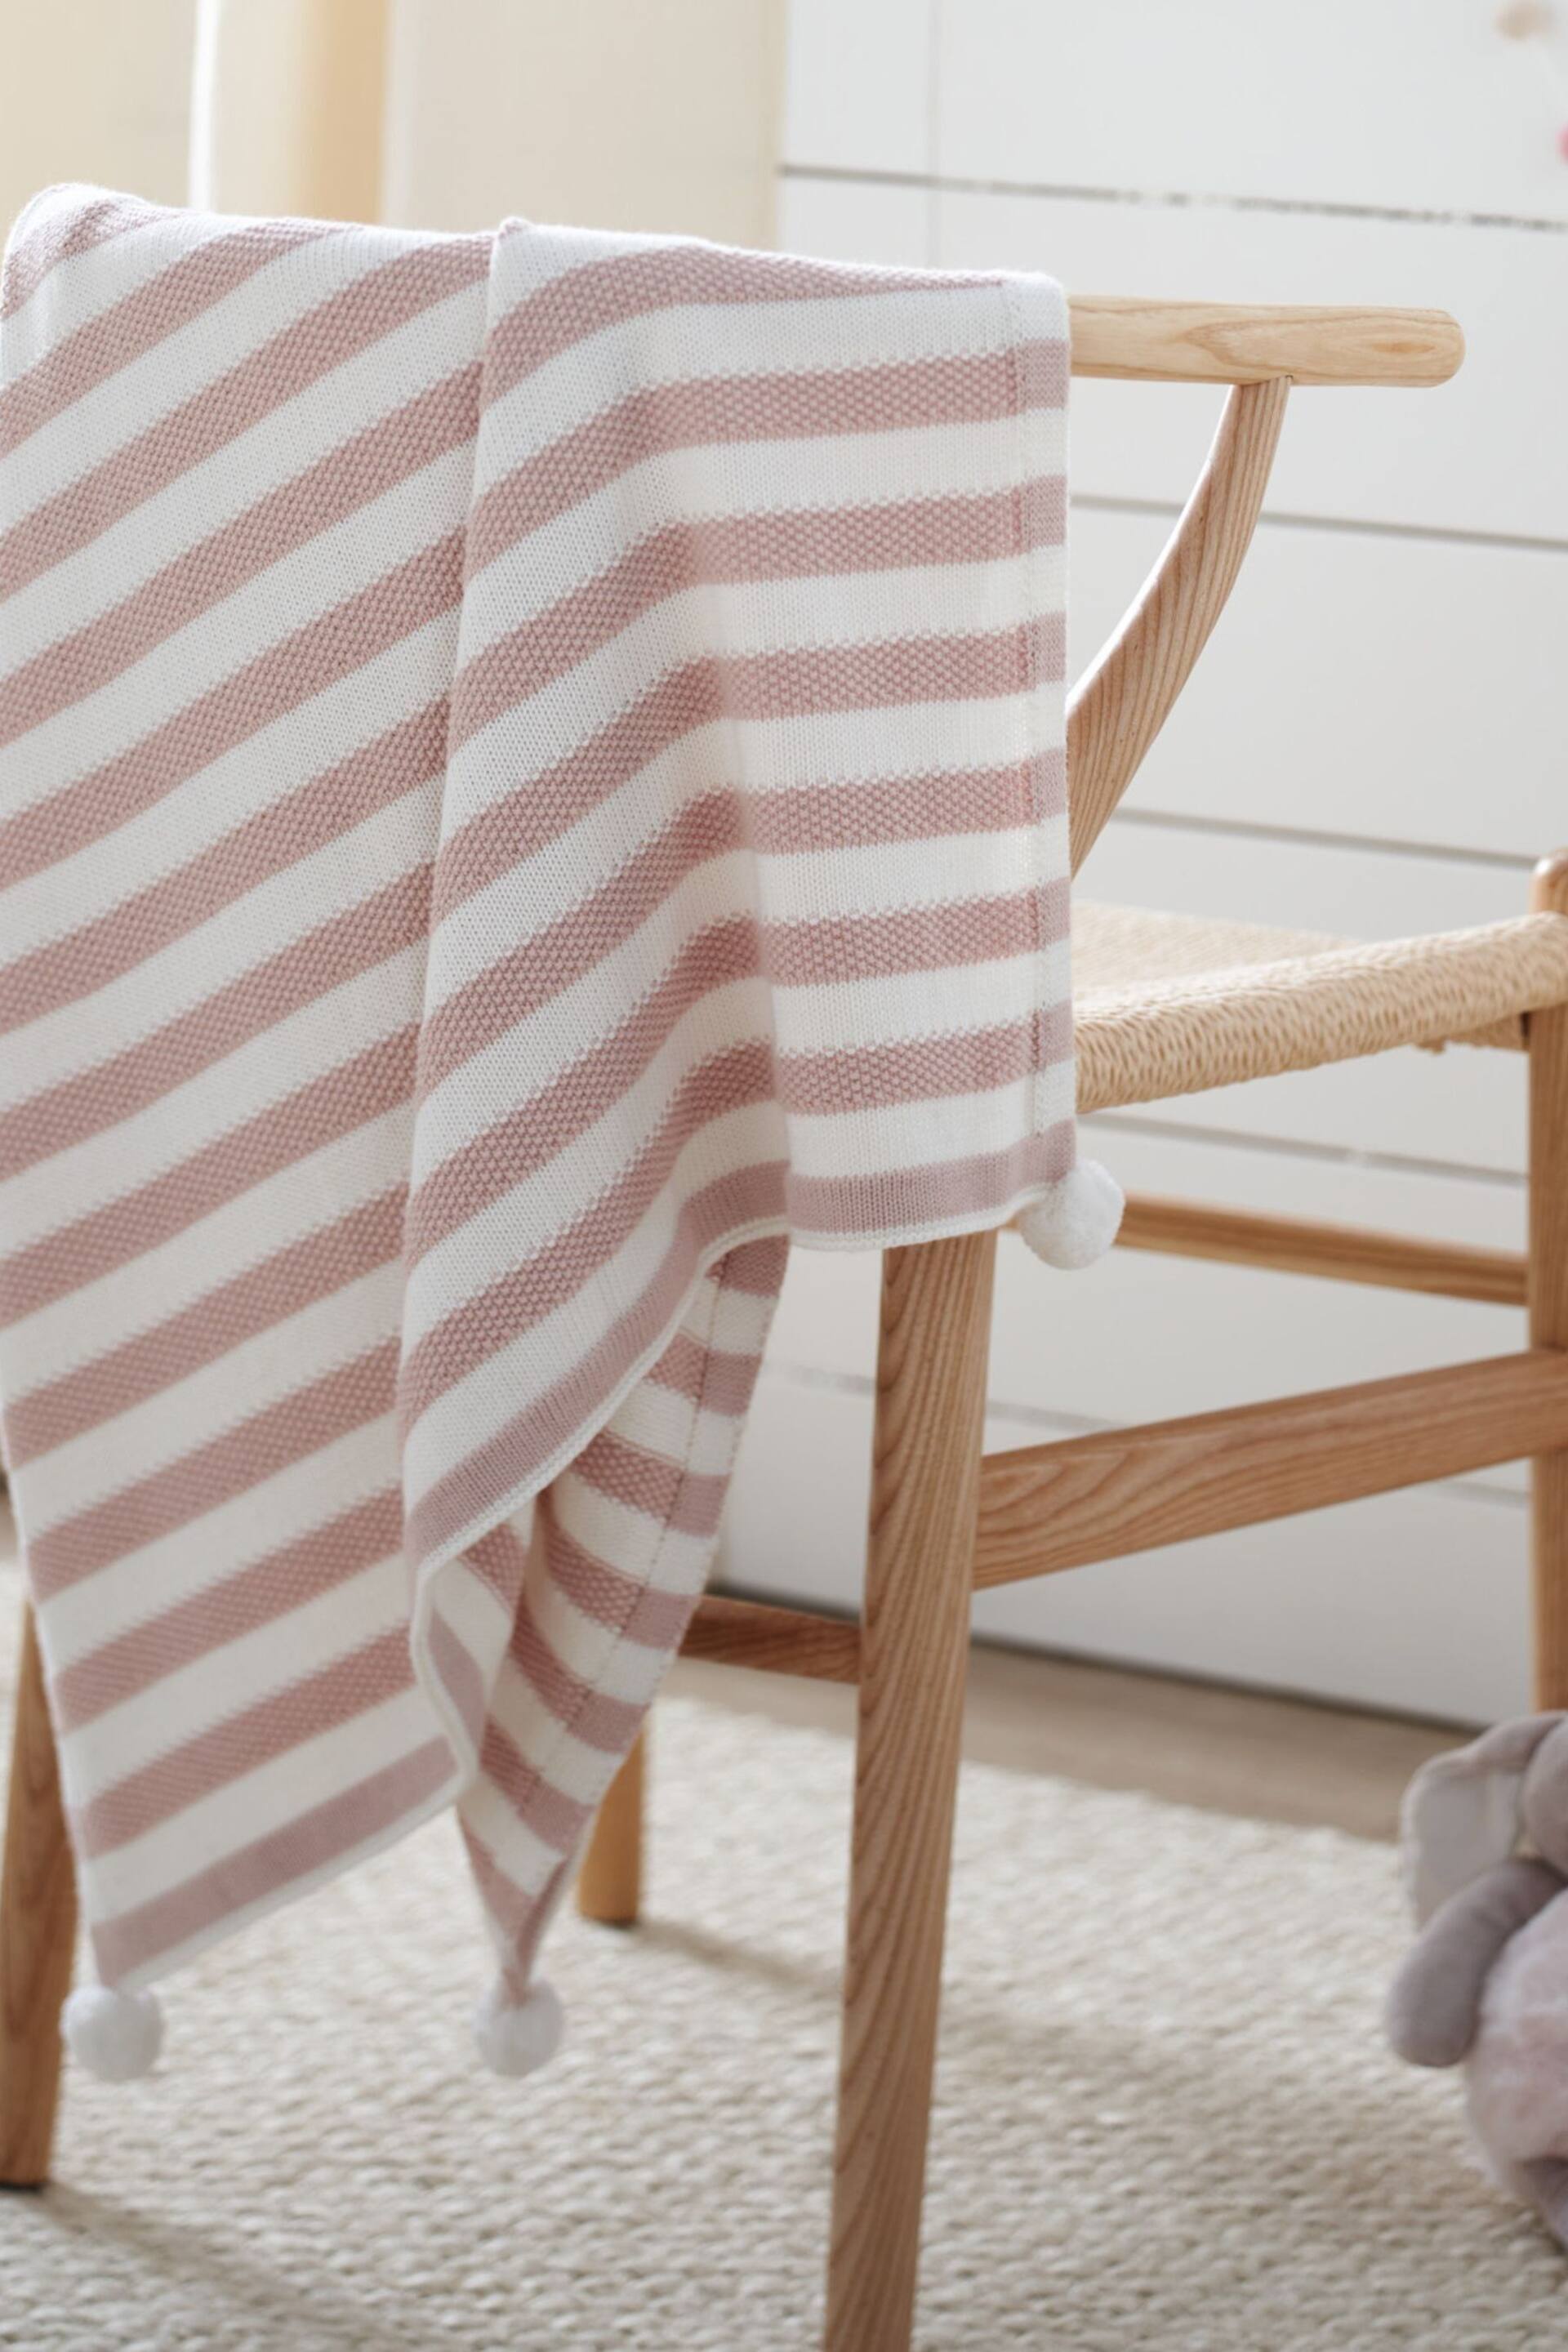 The White Company Pink Stripe Cotton Cashmere Baby Blanket - Image 1 of 2